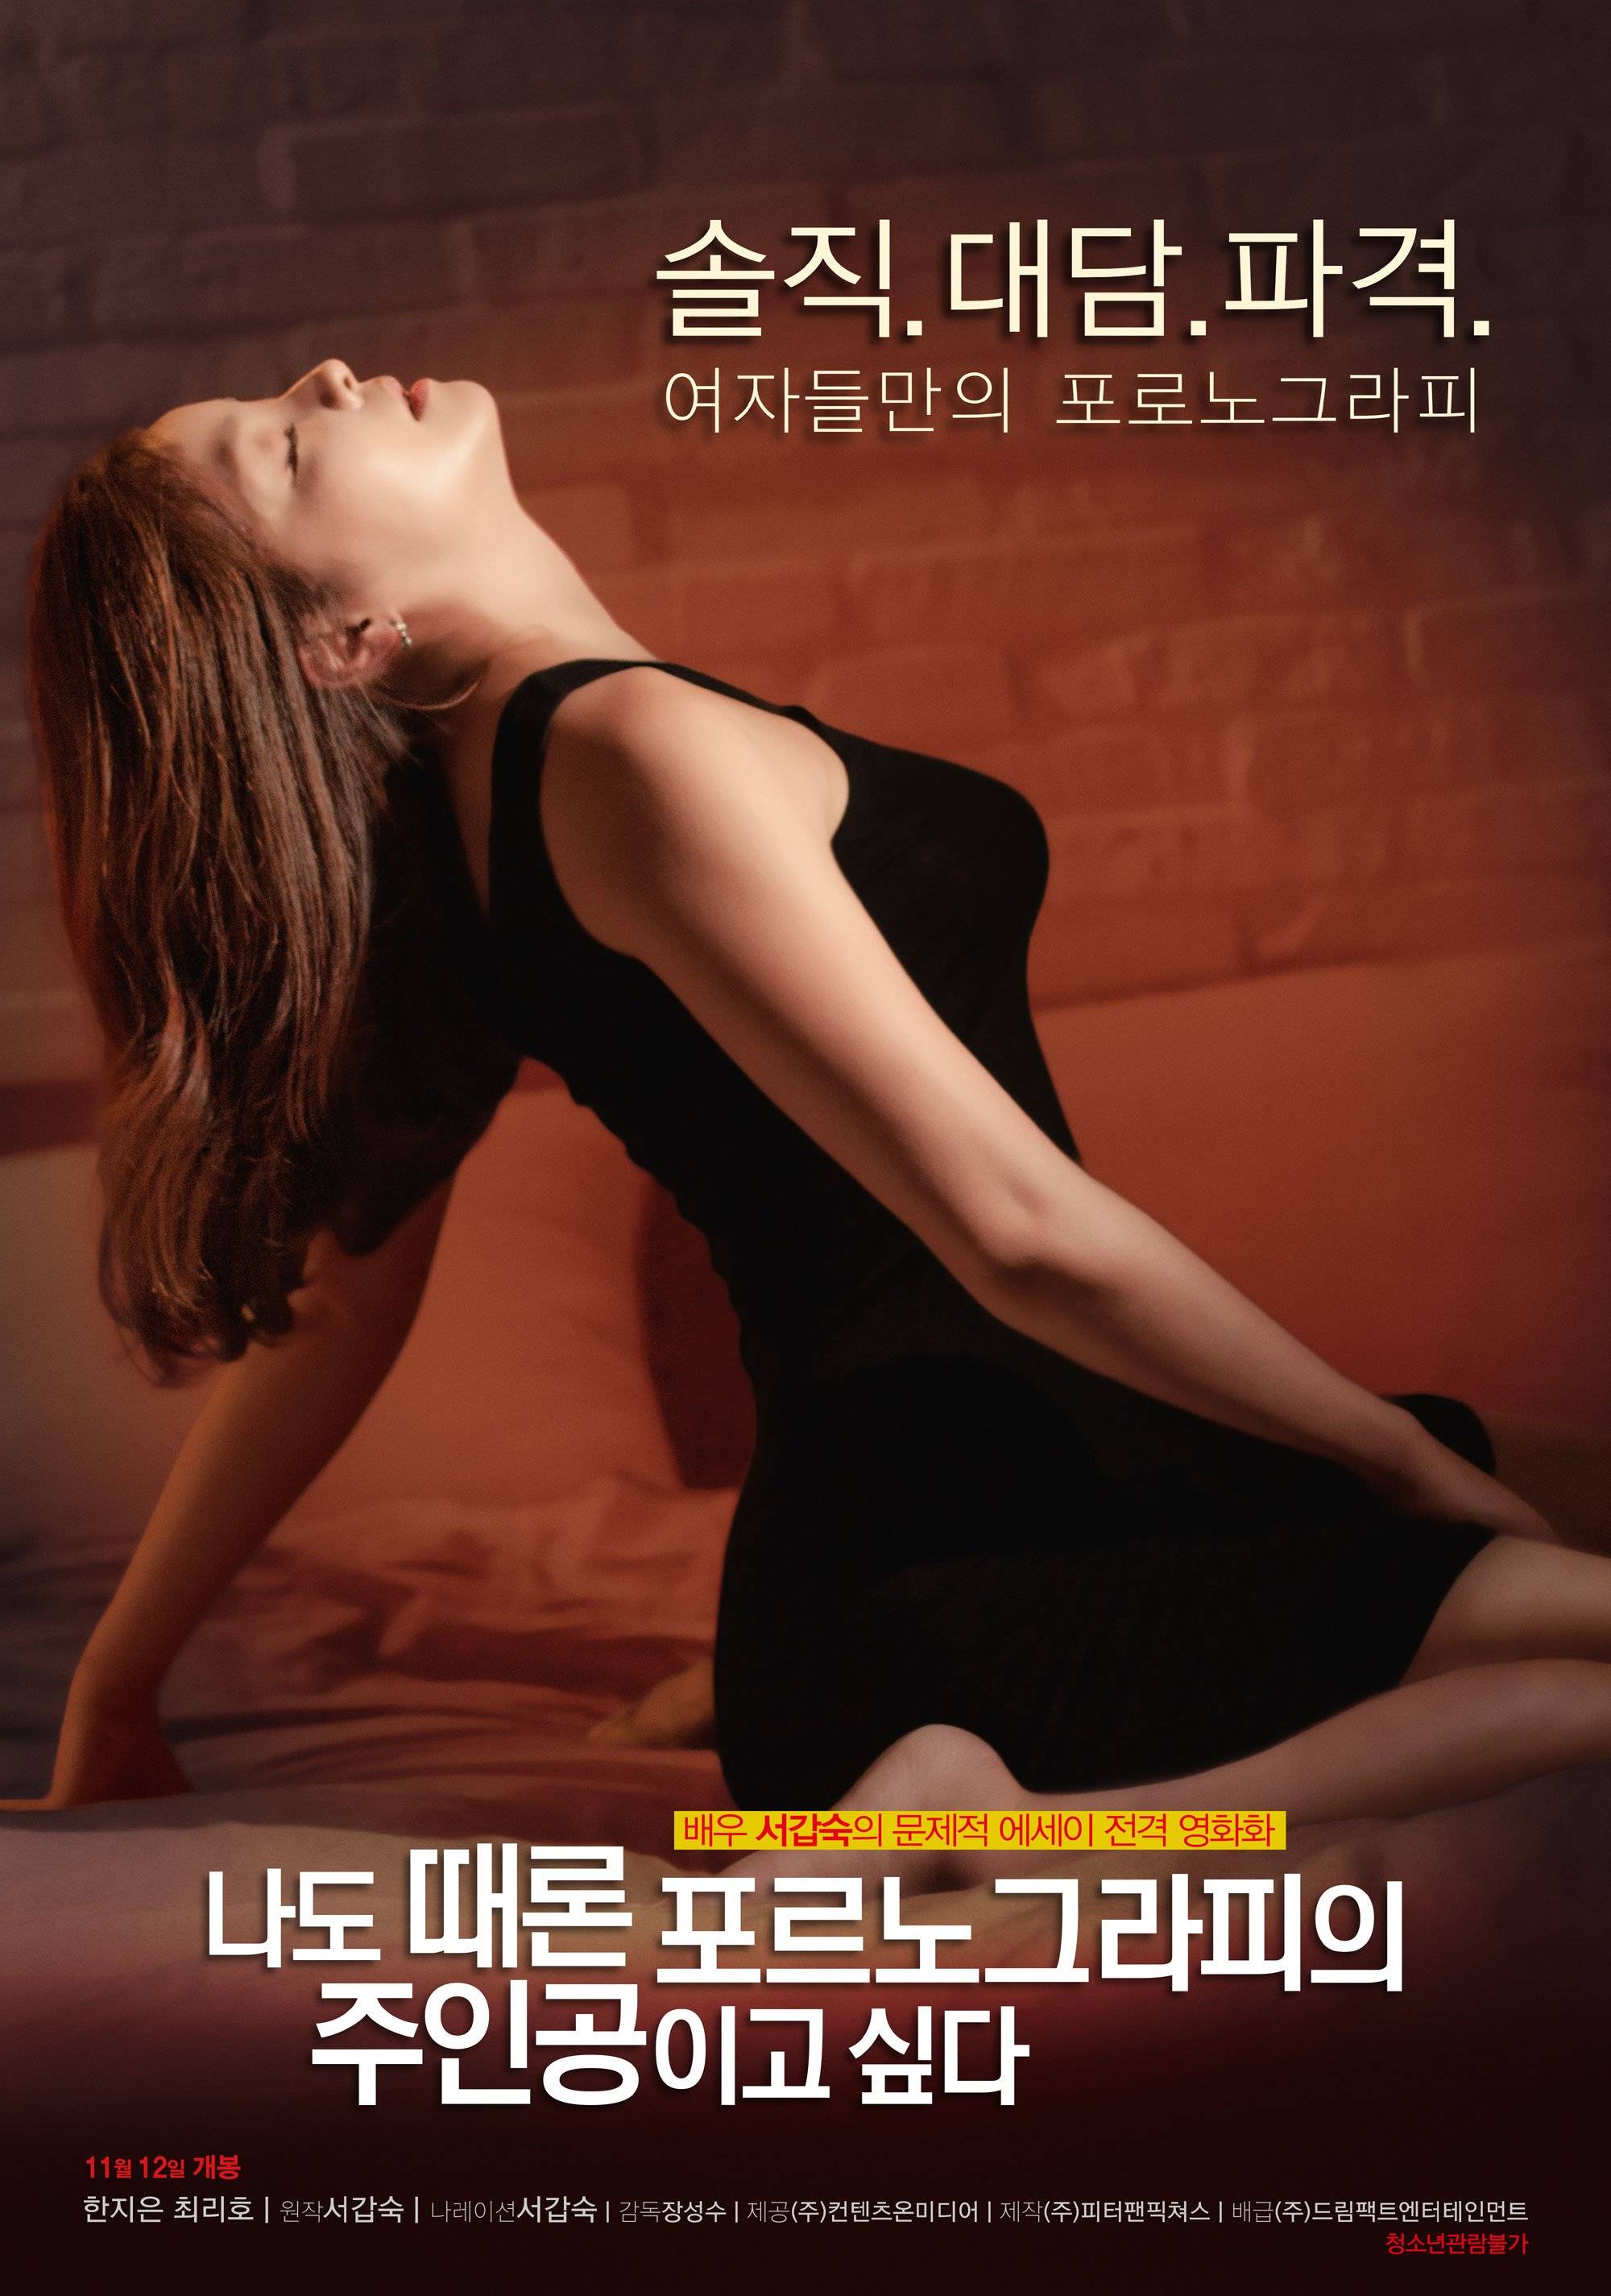 Korean Porn Movies - Photos] Added new poster and stills for the upcoming Korean ...